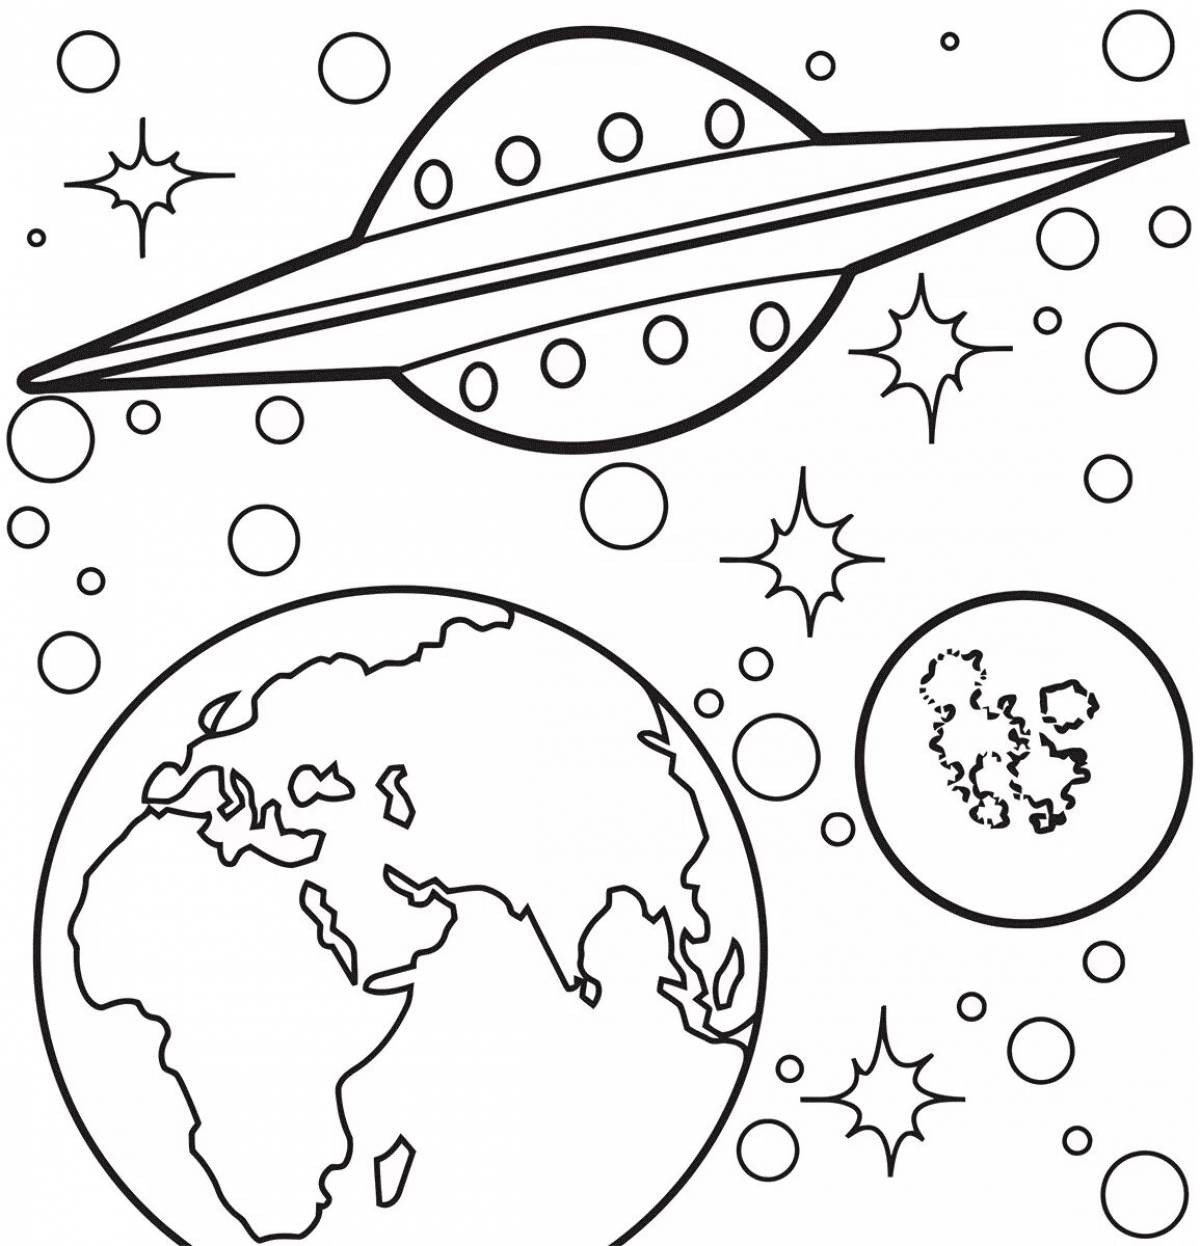 1st class exciting space coloring book